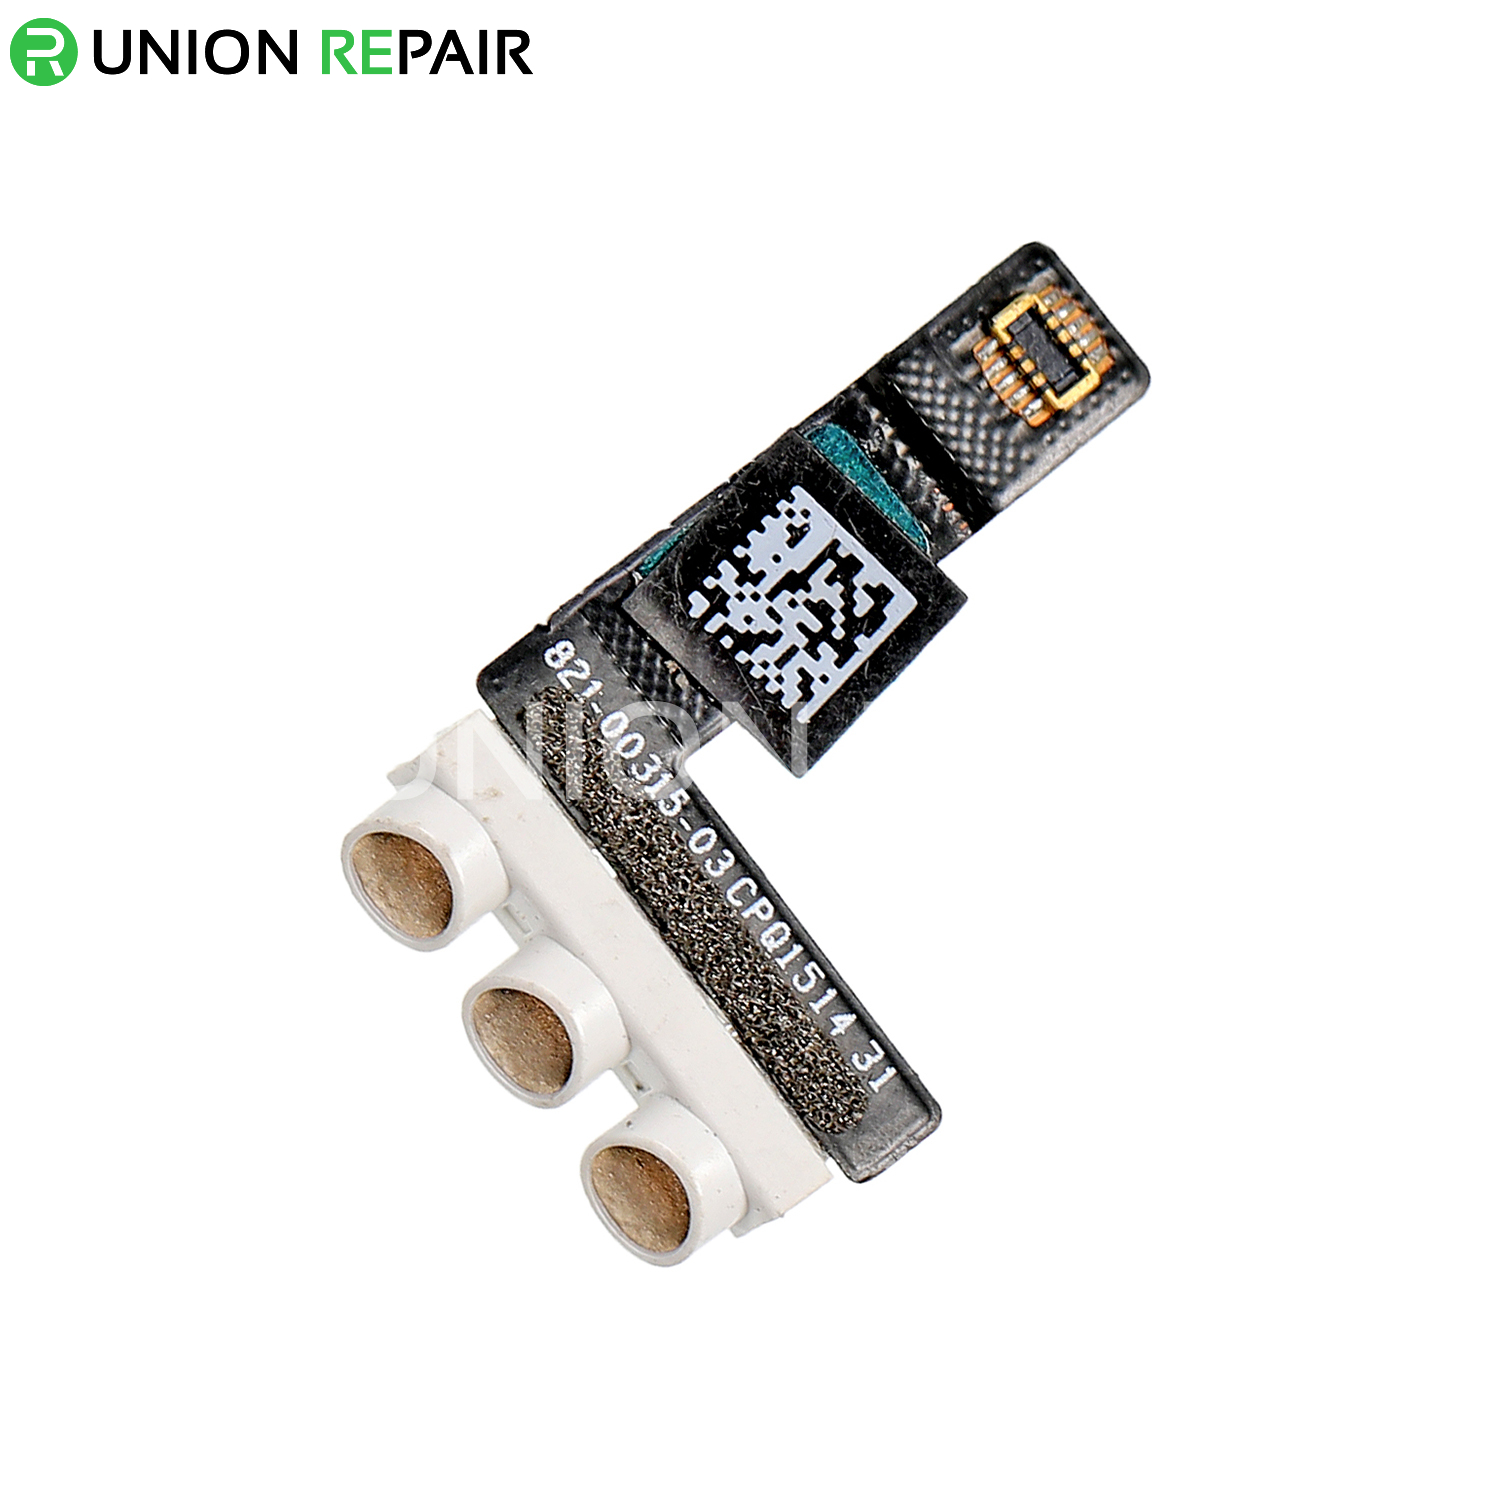 Replacement for iPad Pro 9.7 Smart Connector Port Cable - Gold